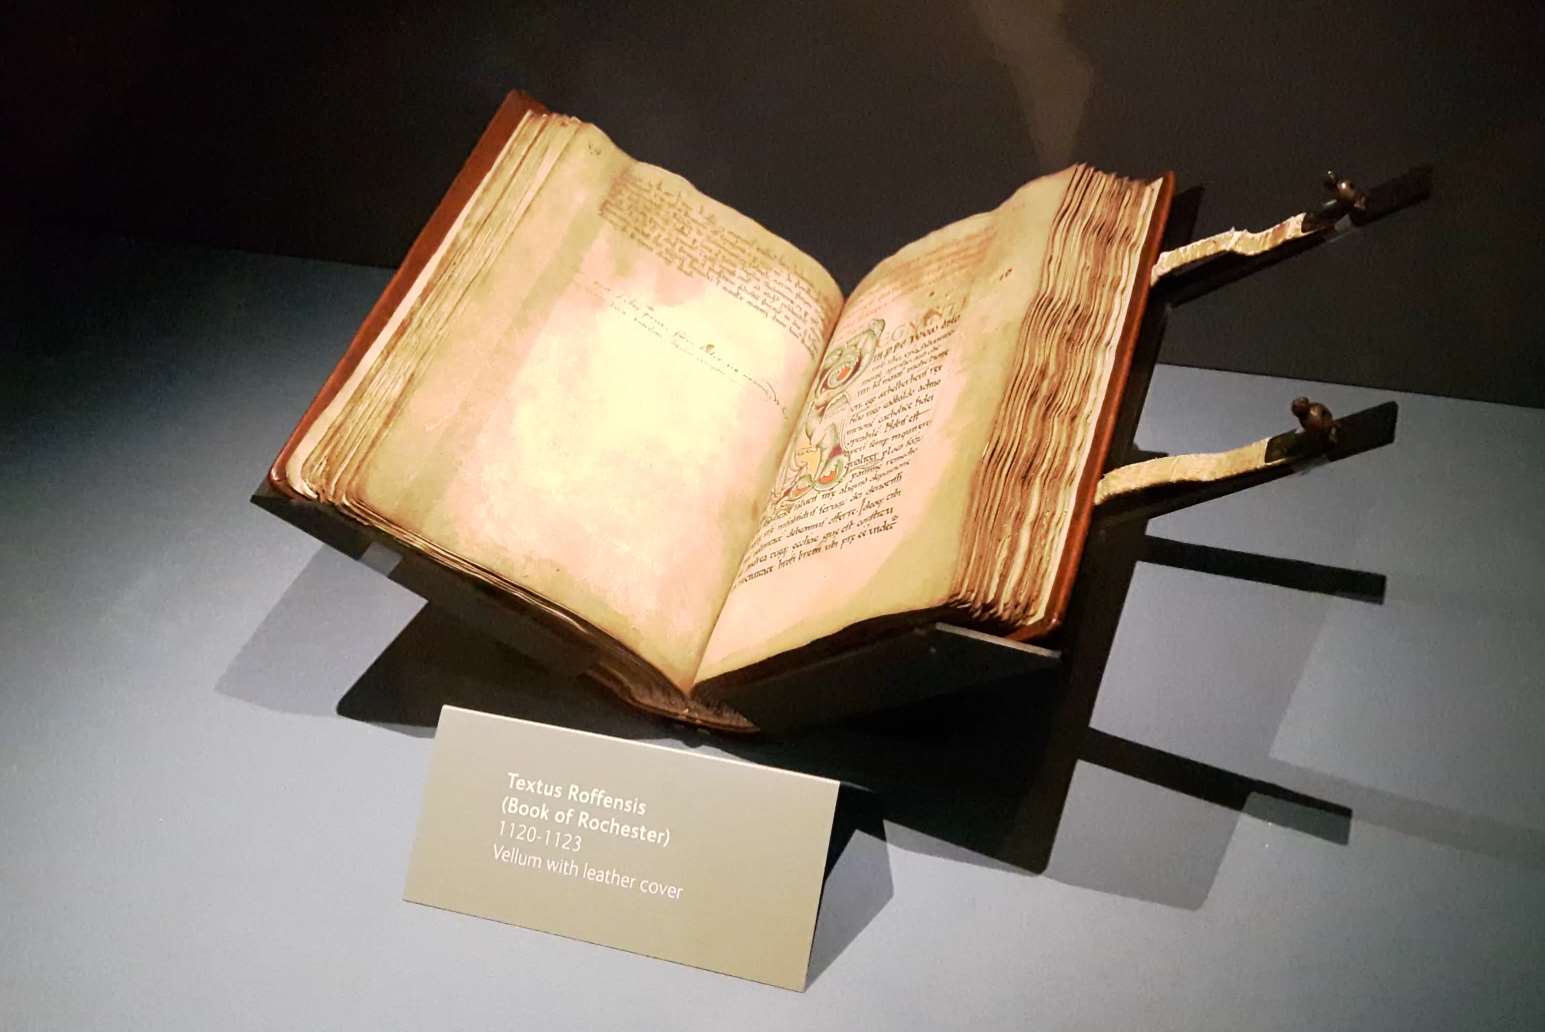 The Textus Roffensis was written by a scribe at Rochester Cathedral